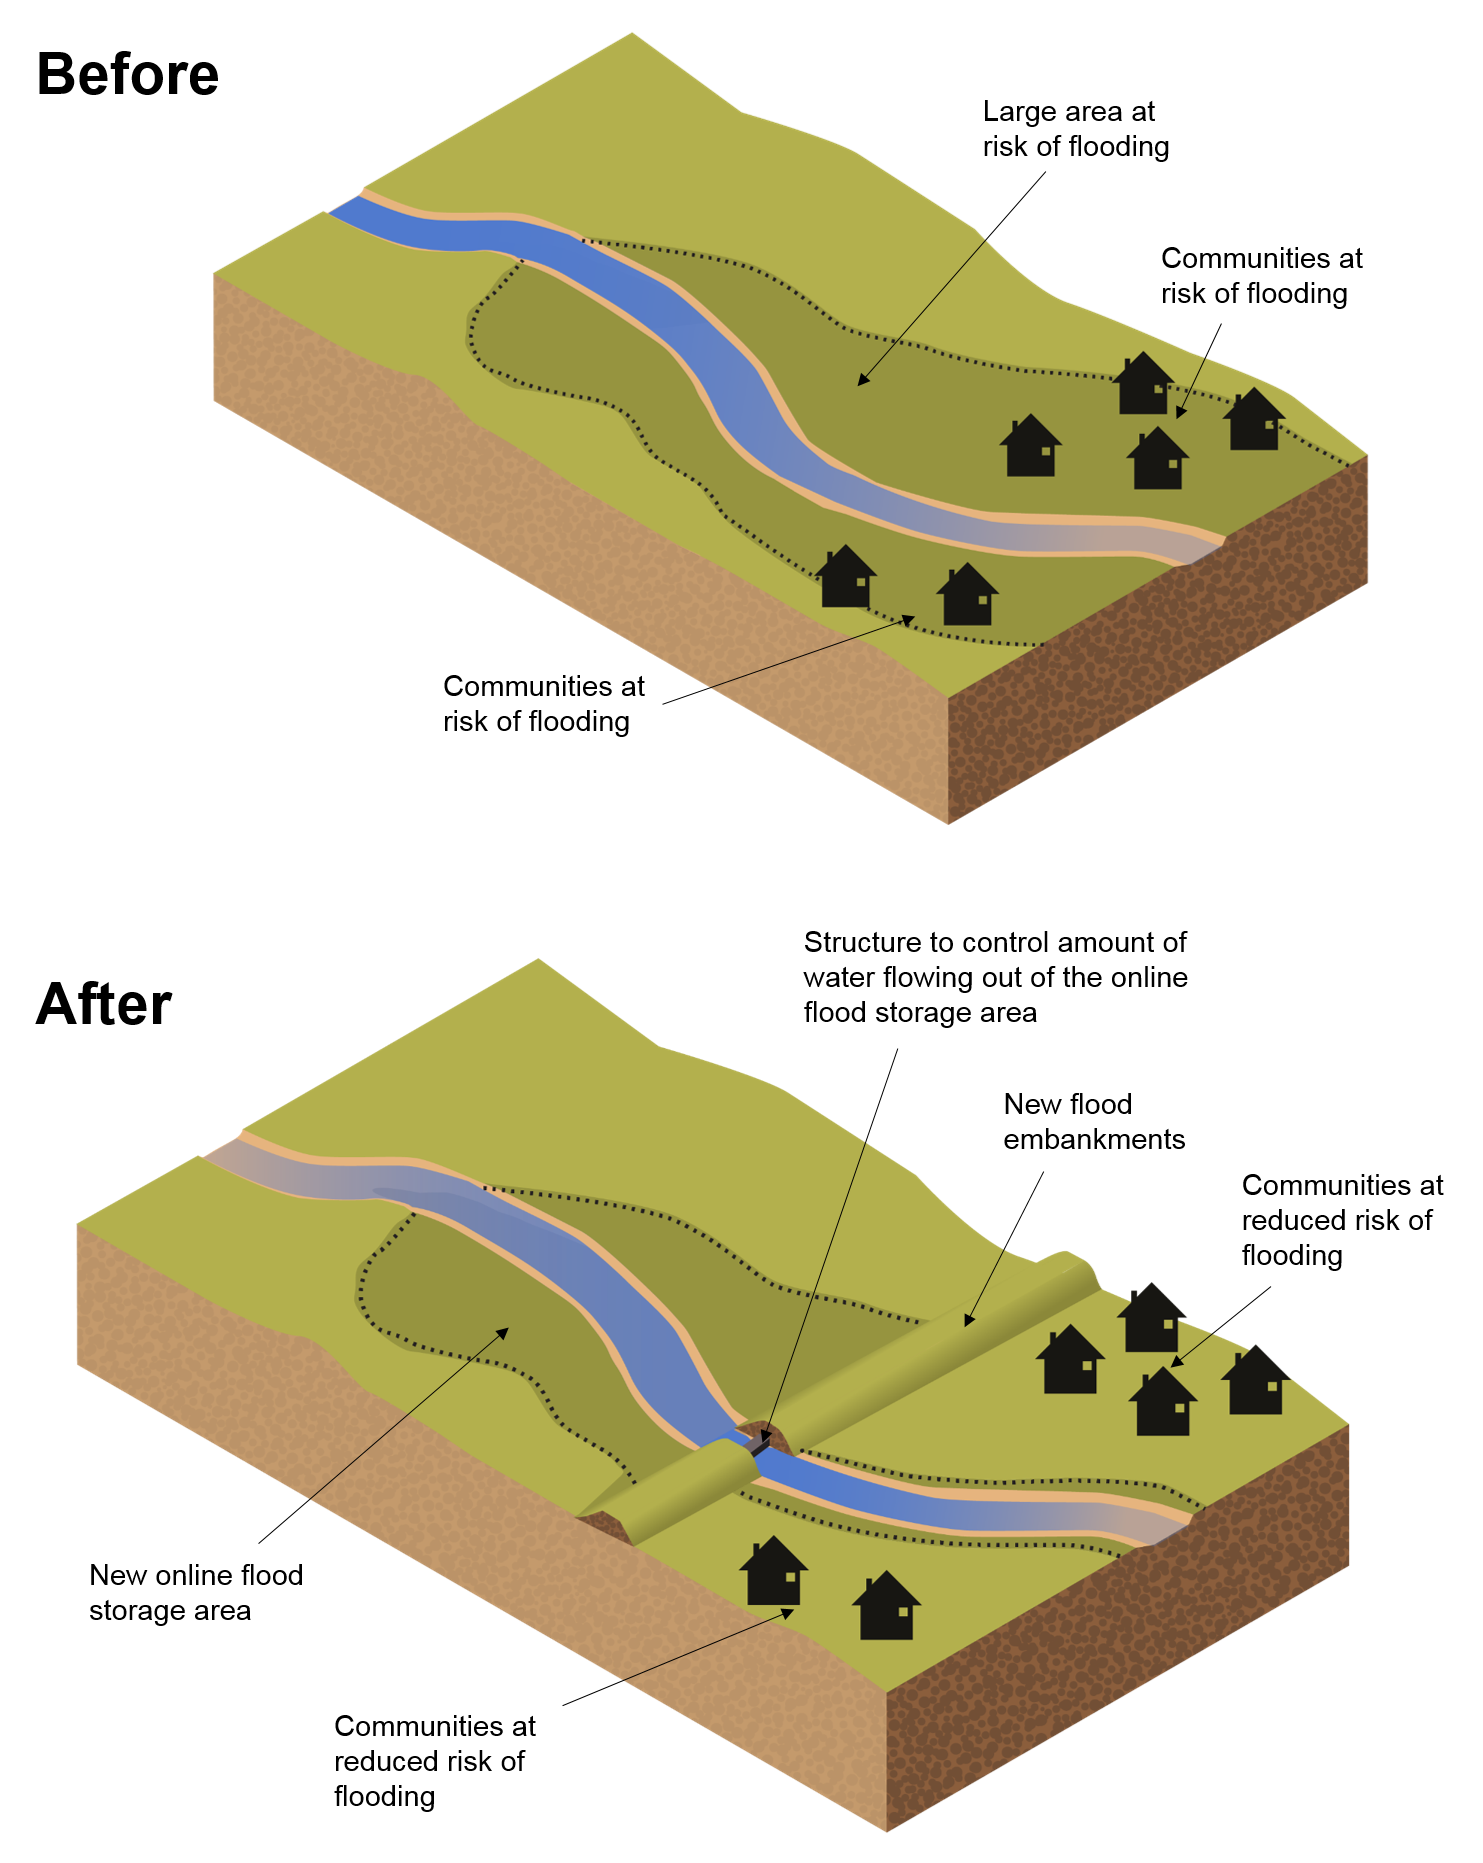 The before image shows an area of land with a river flowing through the middle of the picture from the top to the bottom. Near the lower part of the river in the picture there are buildings representing communities at risk of flooding on both sides of the river. The after image shows an area of land with a river flowing through the middle of the picture from the top to the bottom. Near the lower part of the river in the picture there are buildings representing communities at risk of flooding on both sides of the river. In the open land between the top of the picture and the communities an online flood storage area has been created. An embankment is in place between the online flood storage and the communities at risk of flooding. This embankment contain a structure to control the amount of water flowing out of the online storage area.